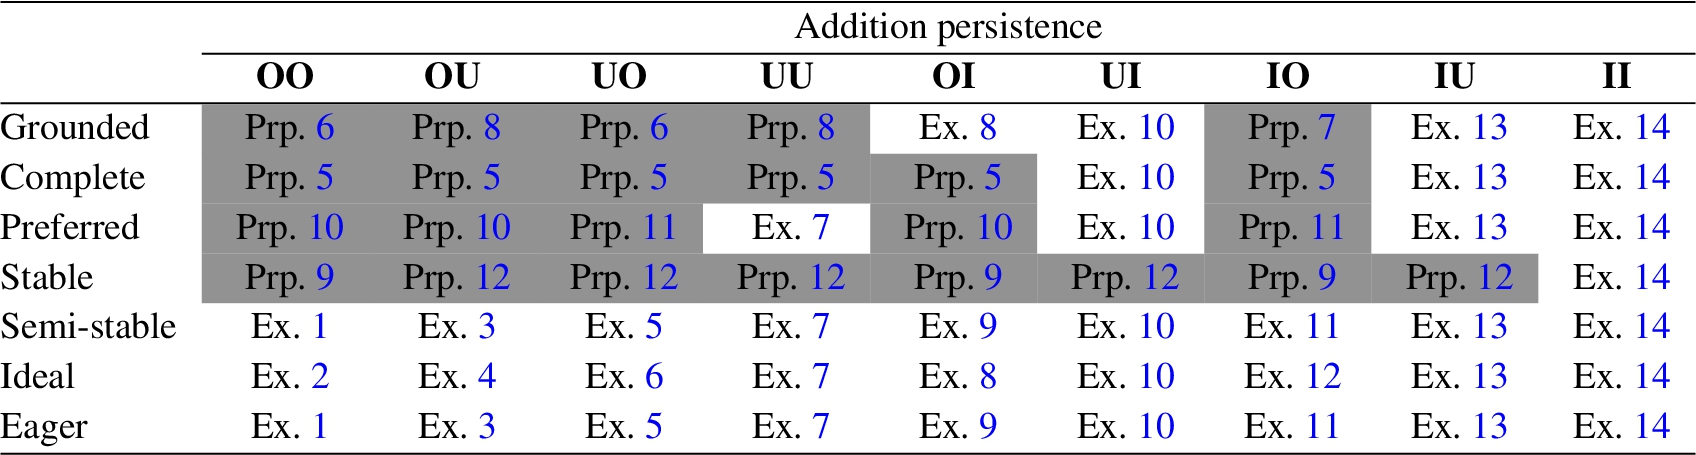 Addition persistence for labelling-based semantics